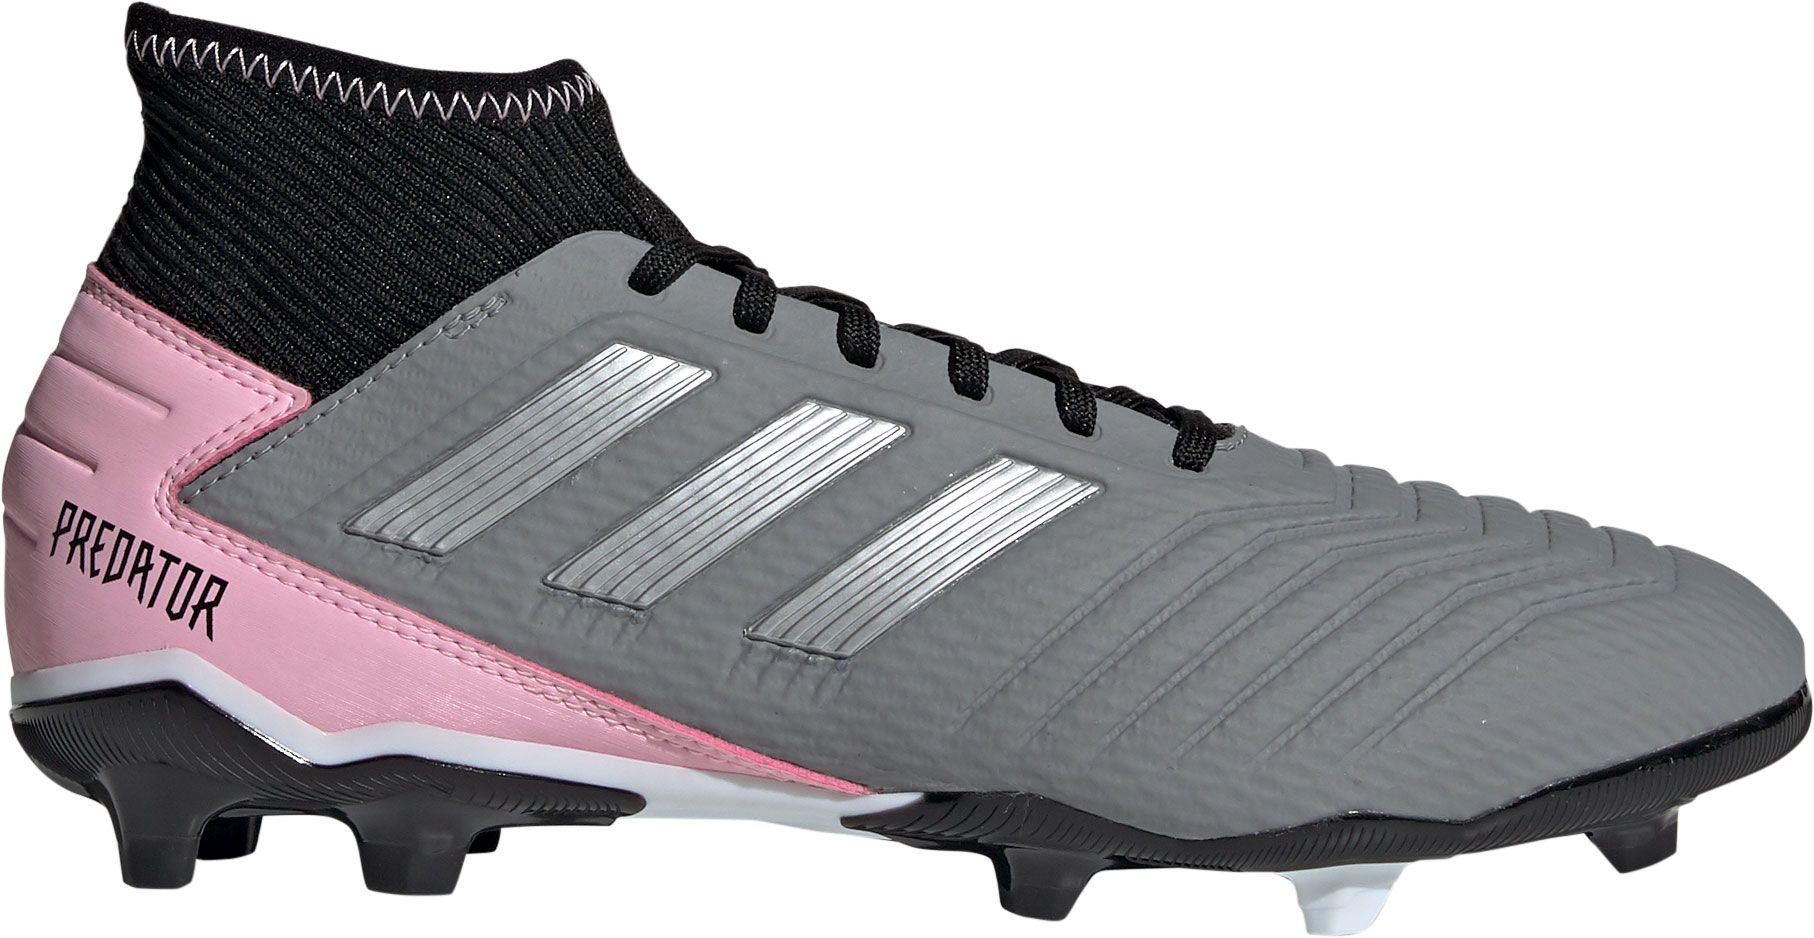 adidas womens soccer cleats